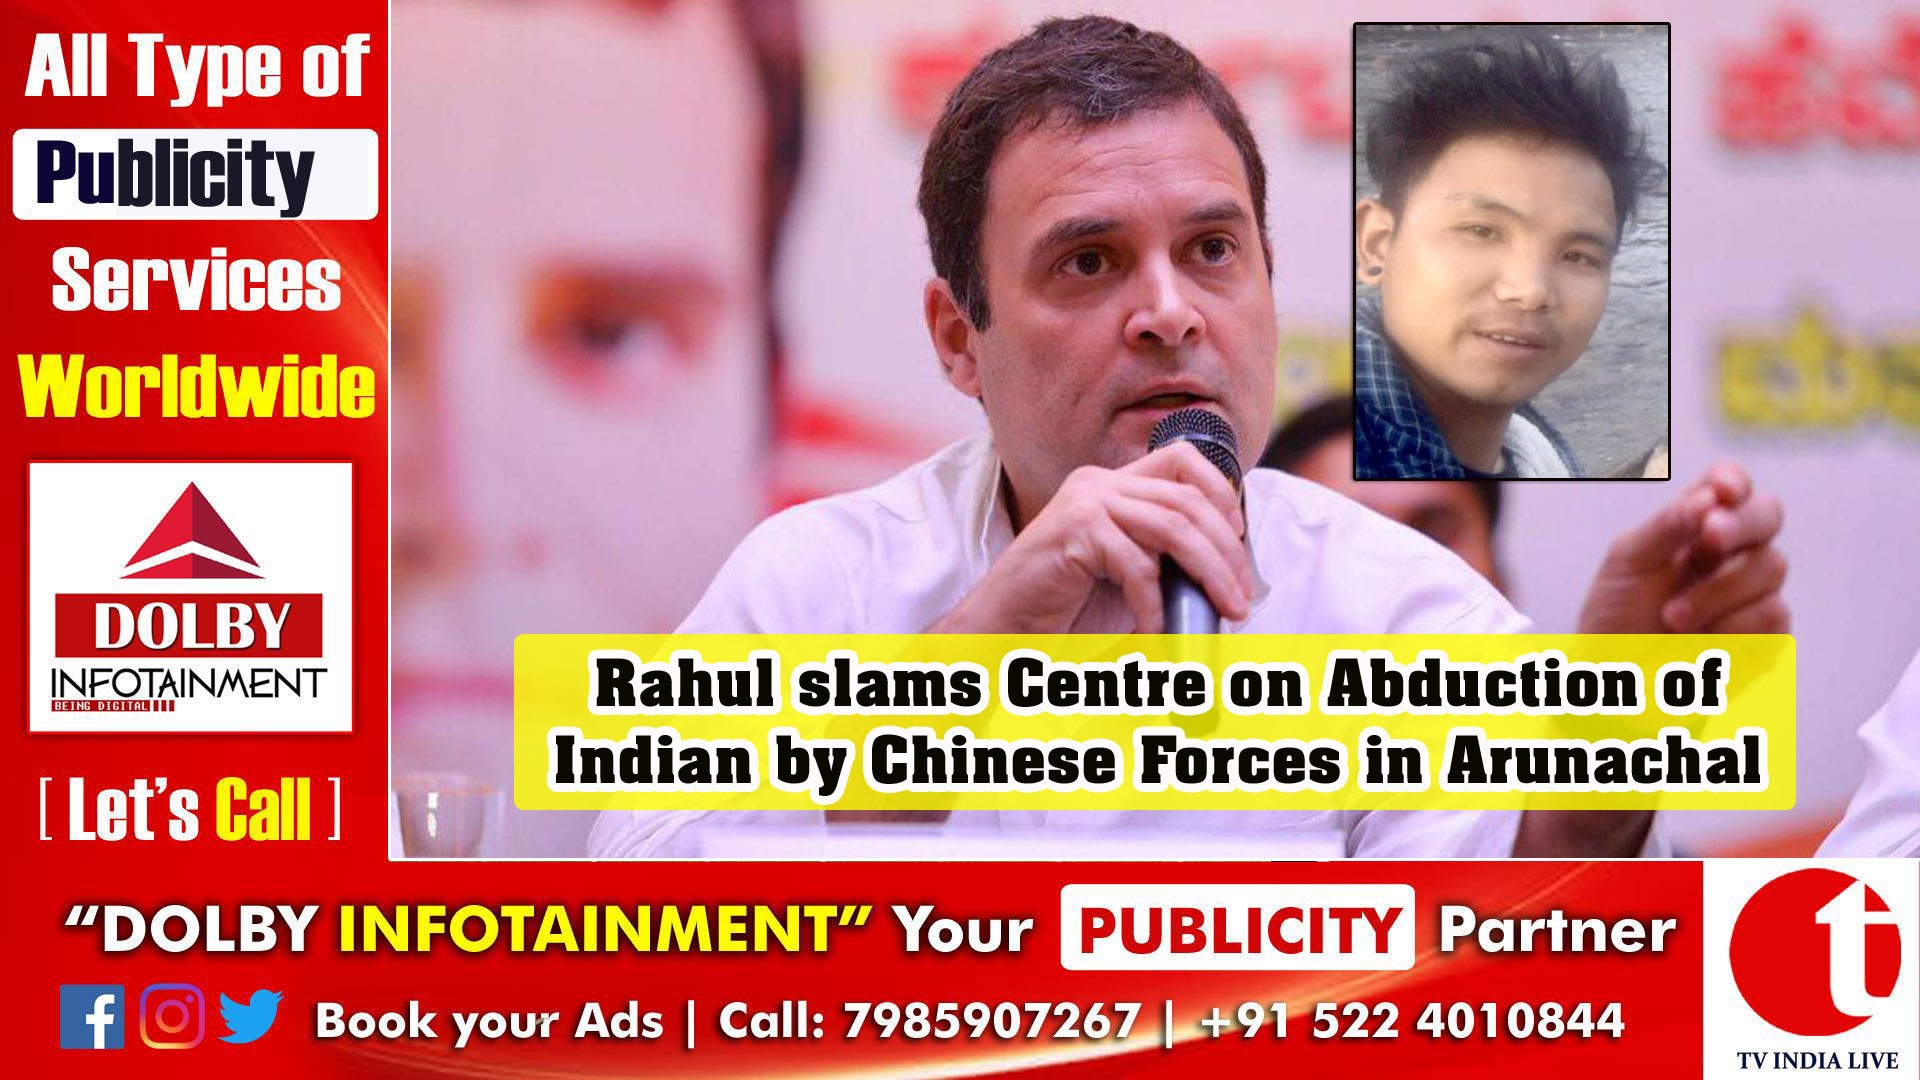 Rahul slams Centre on Abduction of Indian by Chinese Forces in Arunachal